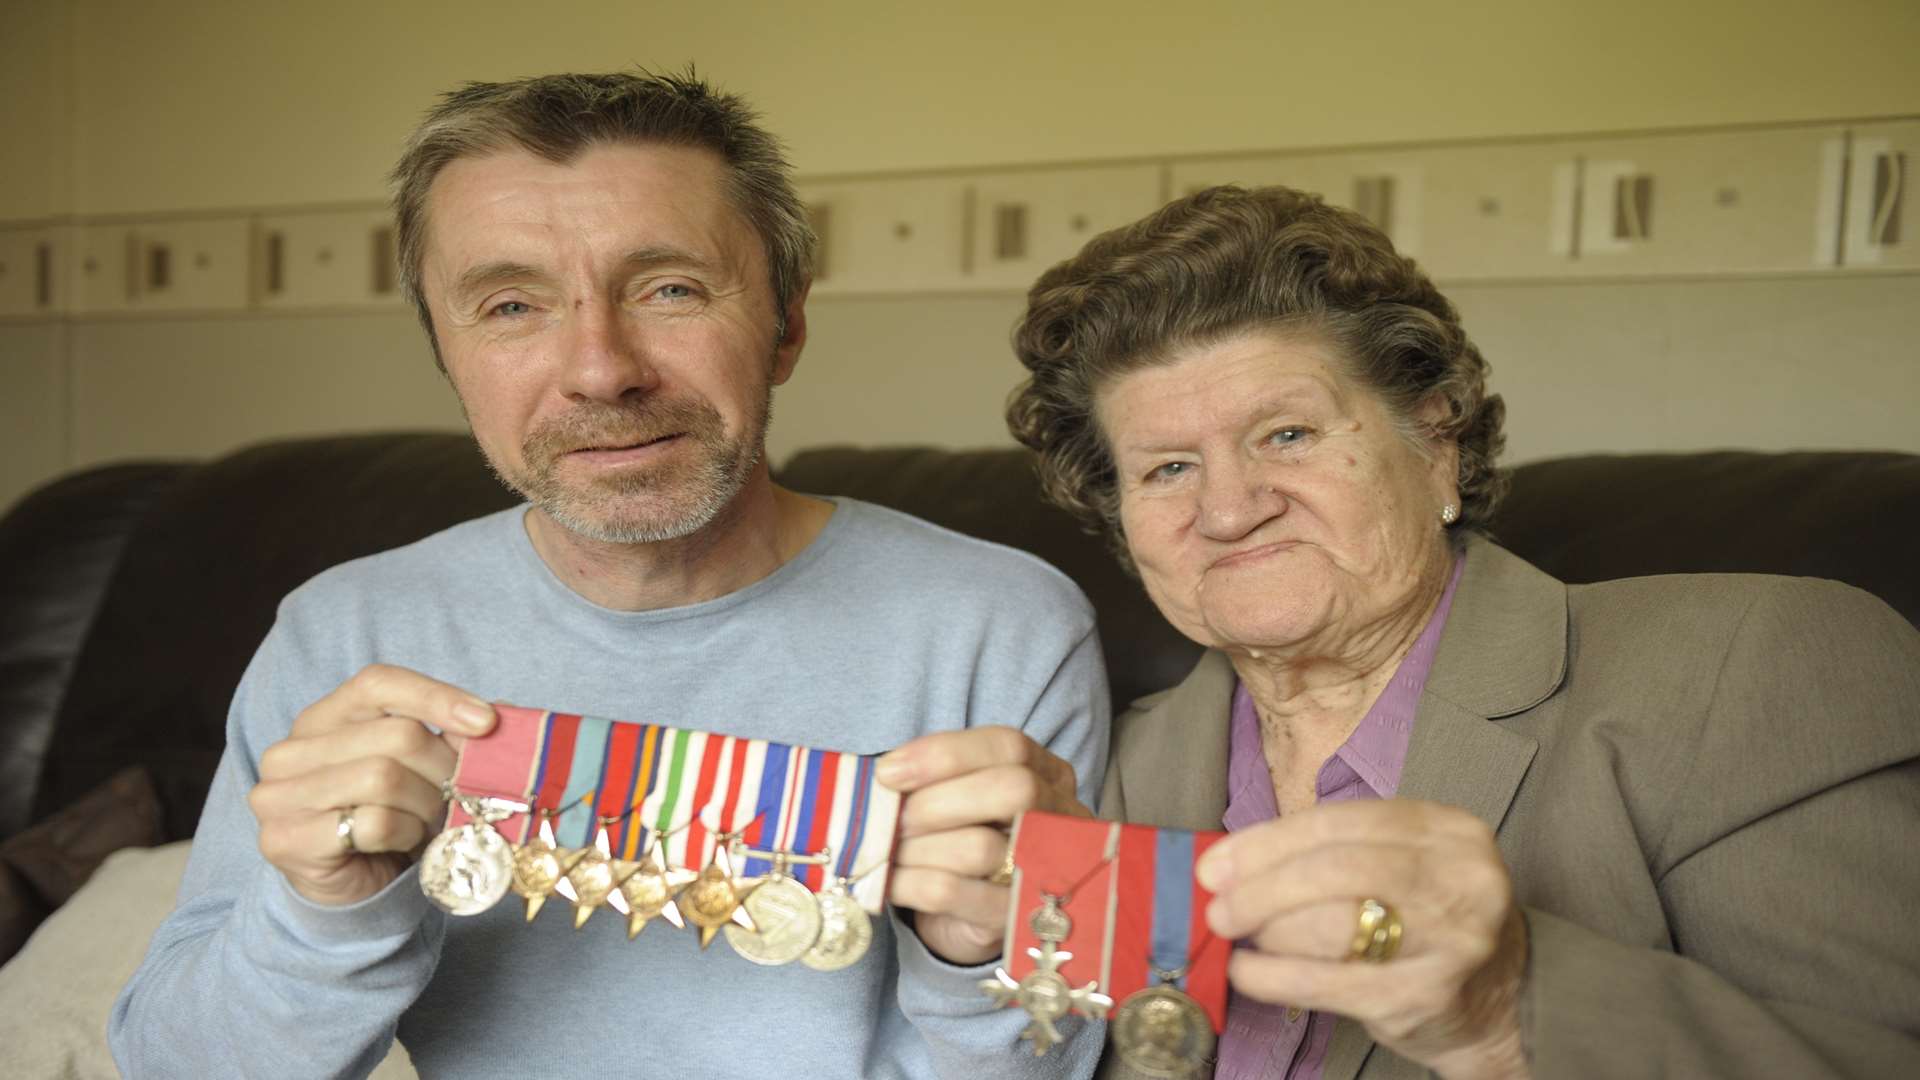 His son Mark with Joe's medals